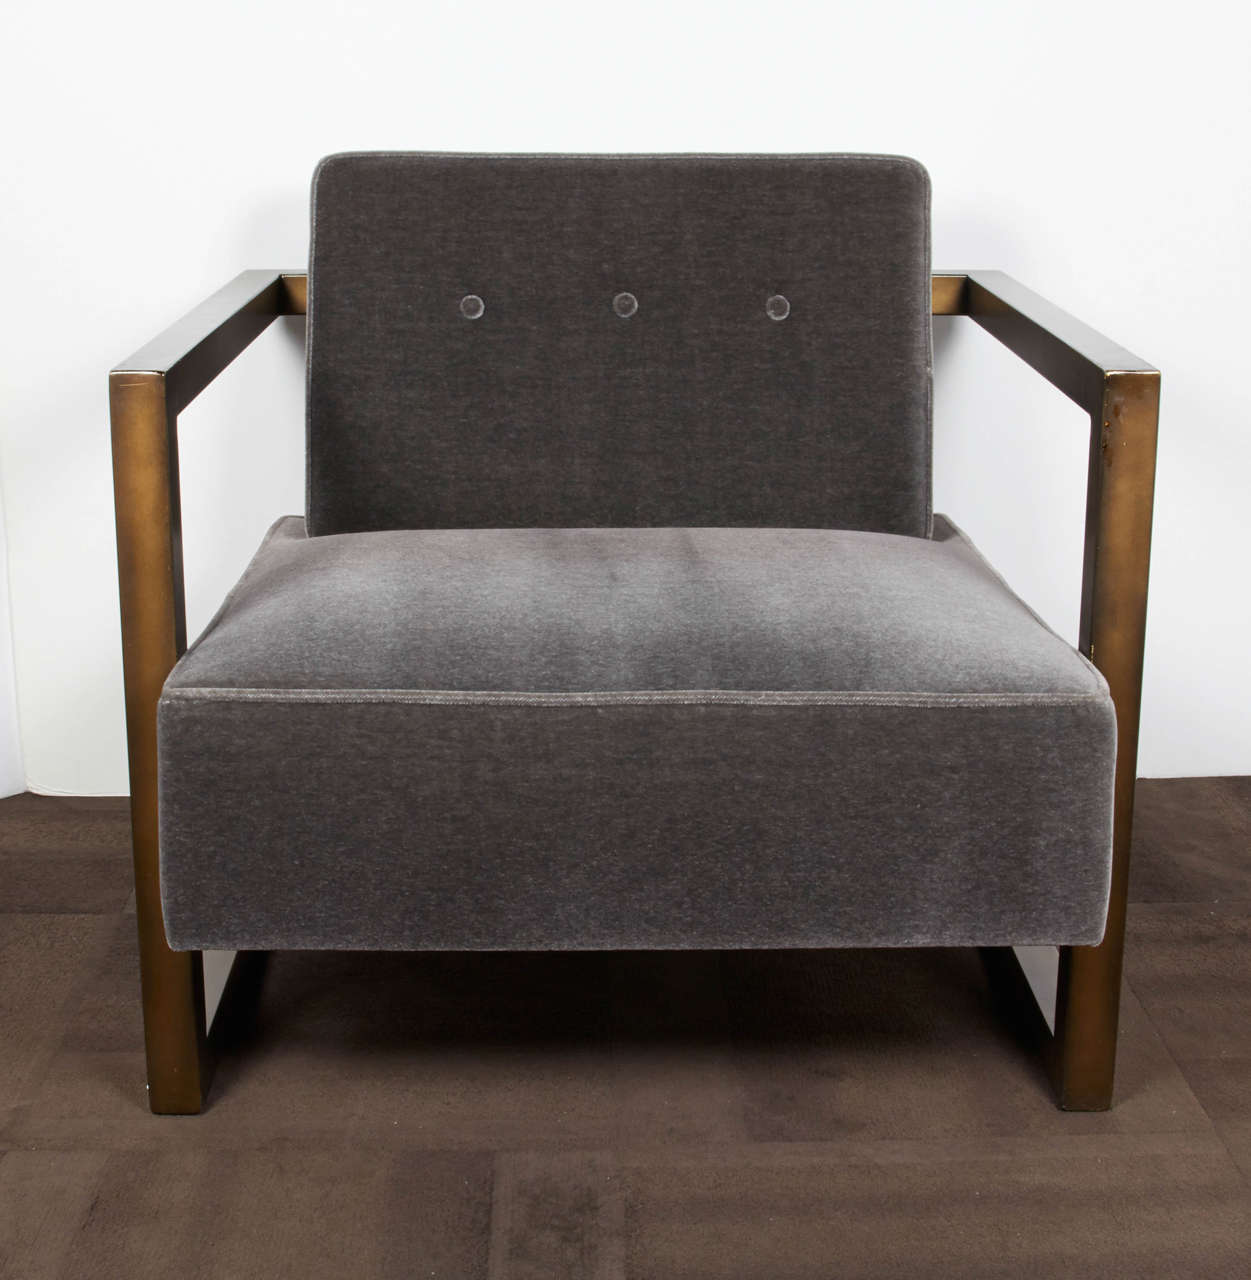 Outstanding modernist club chair with sculptural cantilevered metal frame. 
Newly upholstered in luxurious gunmetal mohair with button back details. The frame has a bronze coated finish, and is gorgeous from all angles.